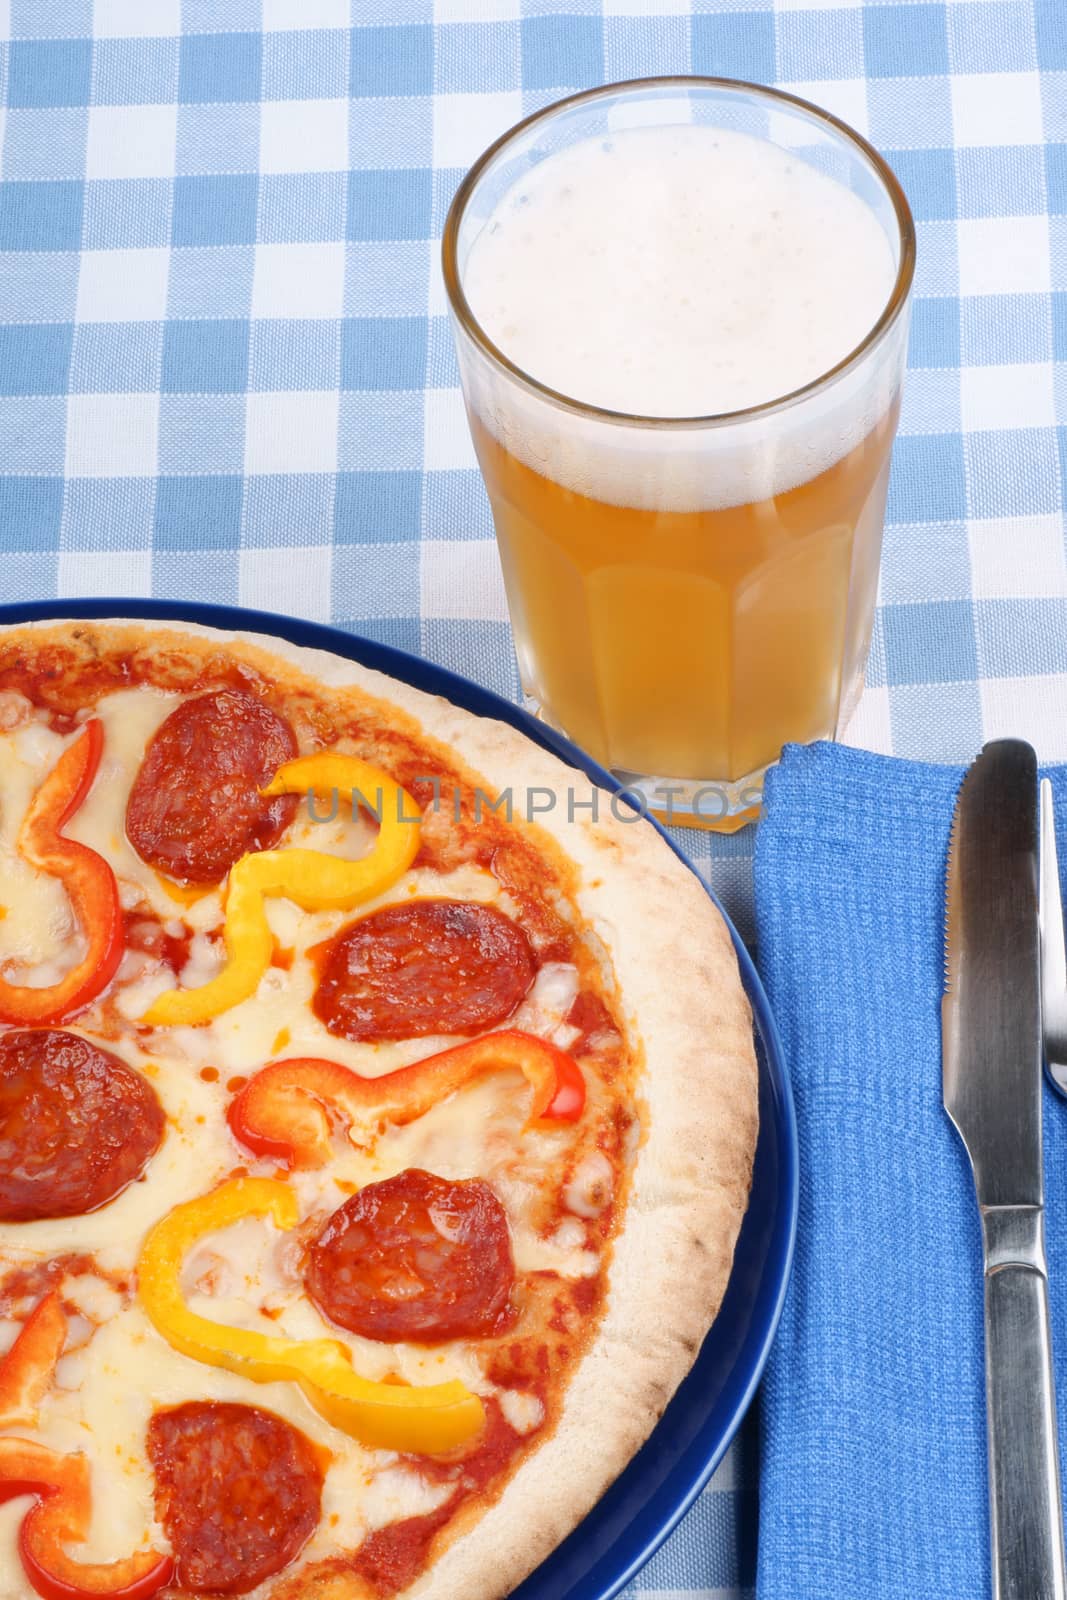 Set table with hot spicy pizza with salami and bell peppers and a glass of beer.